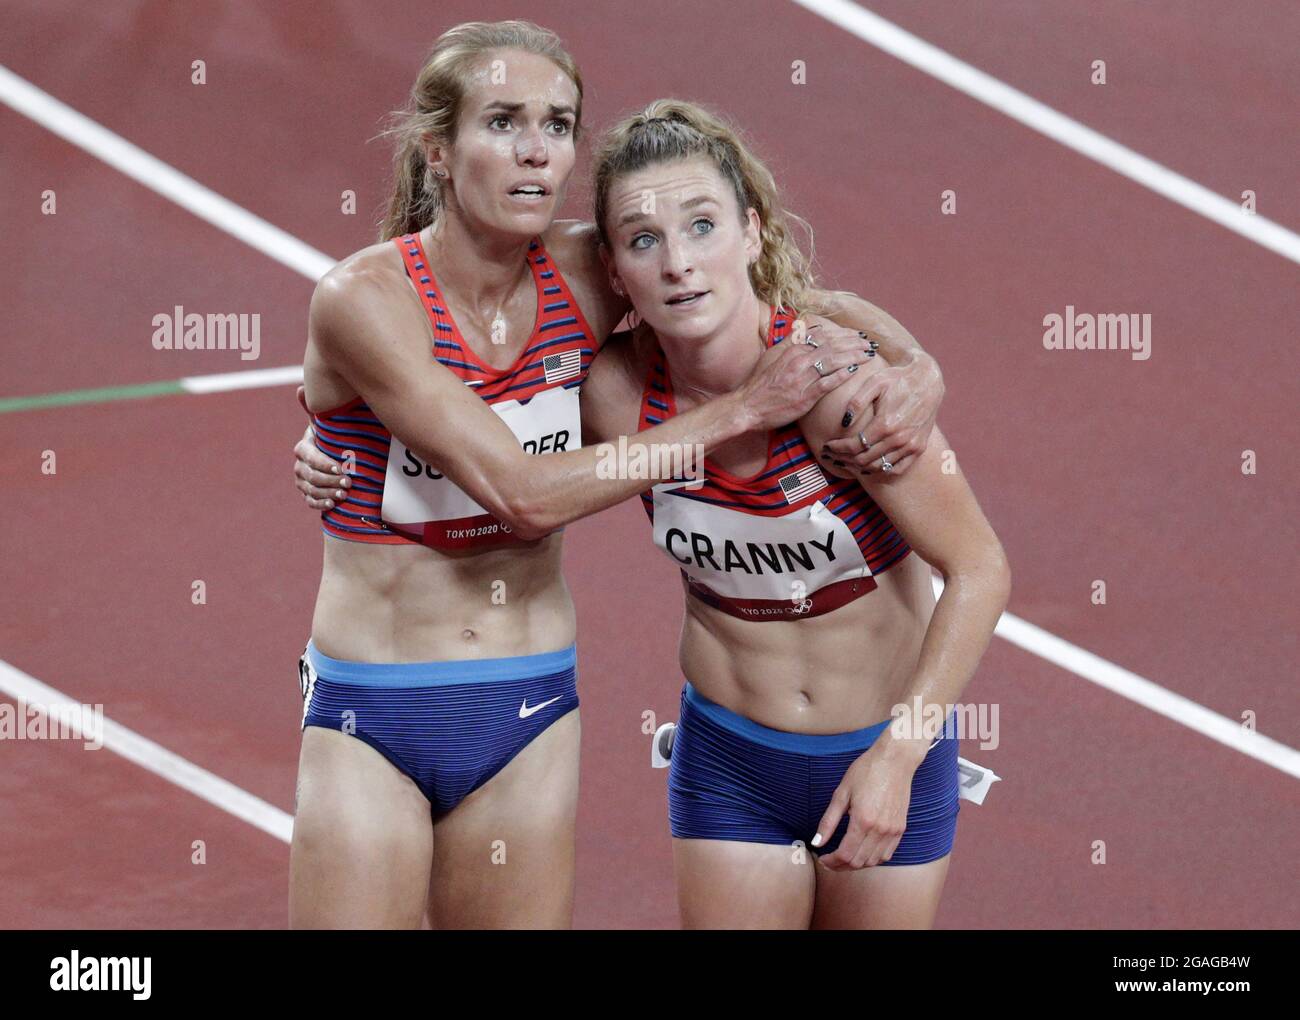 Tokyo, Japan. 30th July, 2021. Elise Cranny of the USA (R) hugs compatriot Karissa Schweizer after they both qualified for the finals of the Women's 3000m at the Athletics competition during the Tokyo Summer Olympics in Tokyo, Japan, on Friday, July 30, 2021. Photo by Bob Strong/UPI. Credit: UPI/Alamy Live News Stock Photo